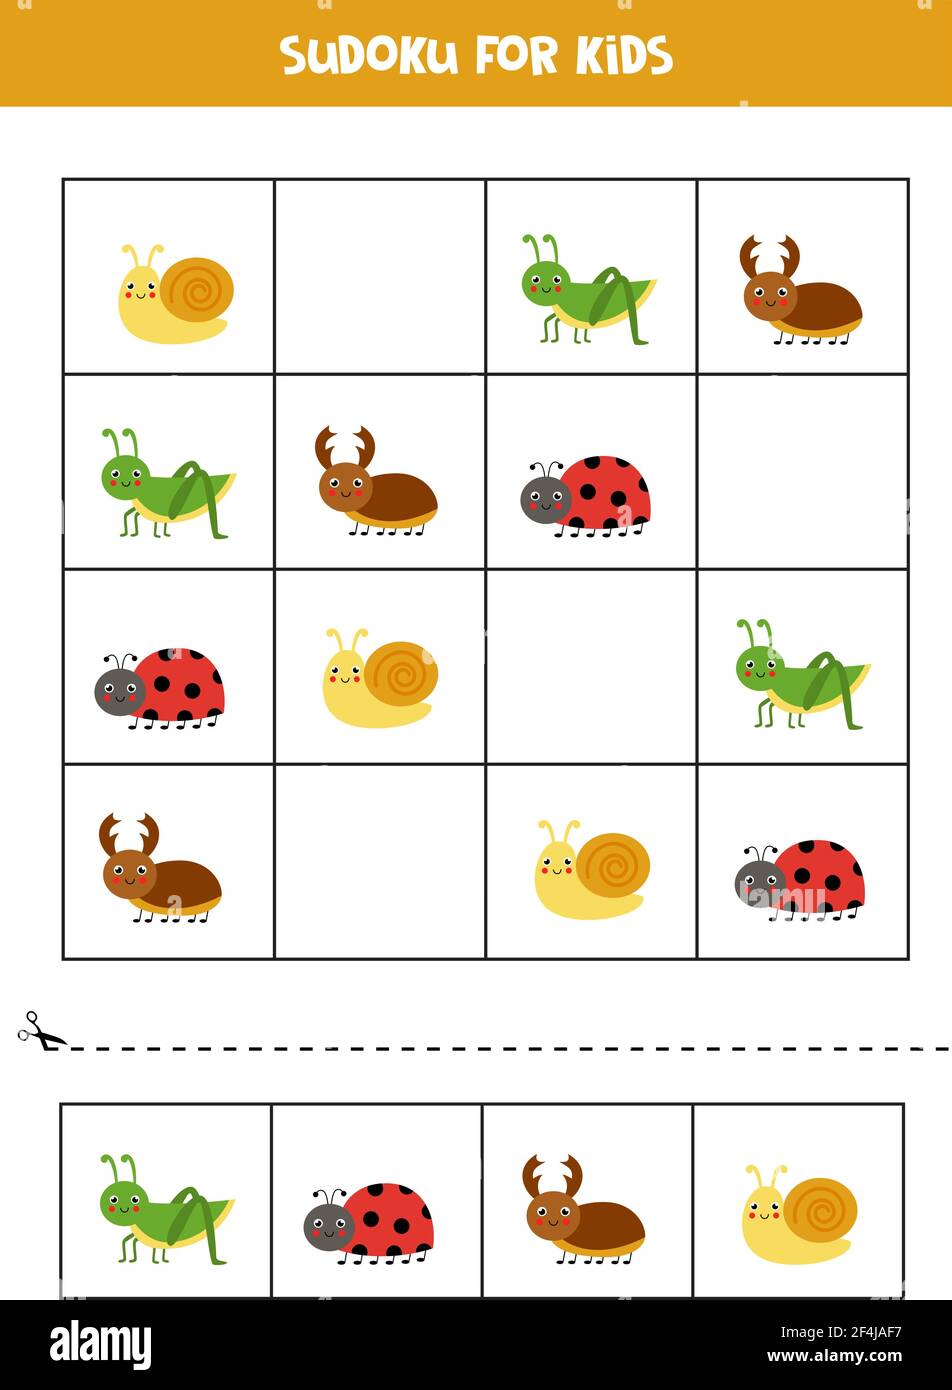 Sudoku for preschool kids. Logical game with cute insects. Stock Vector